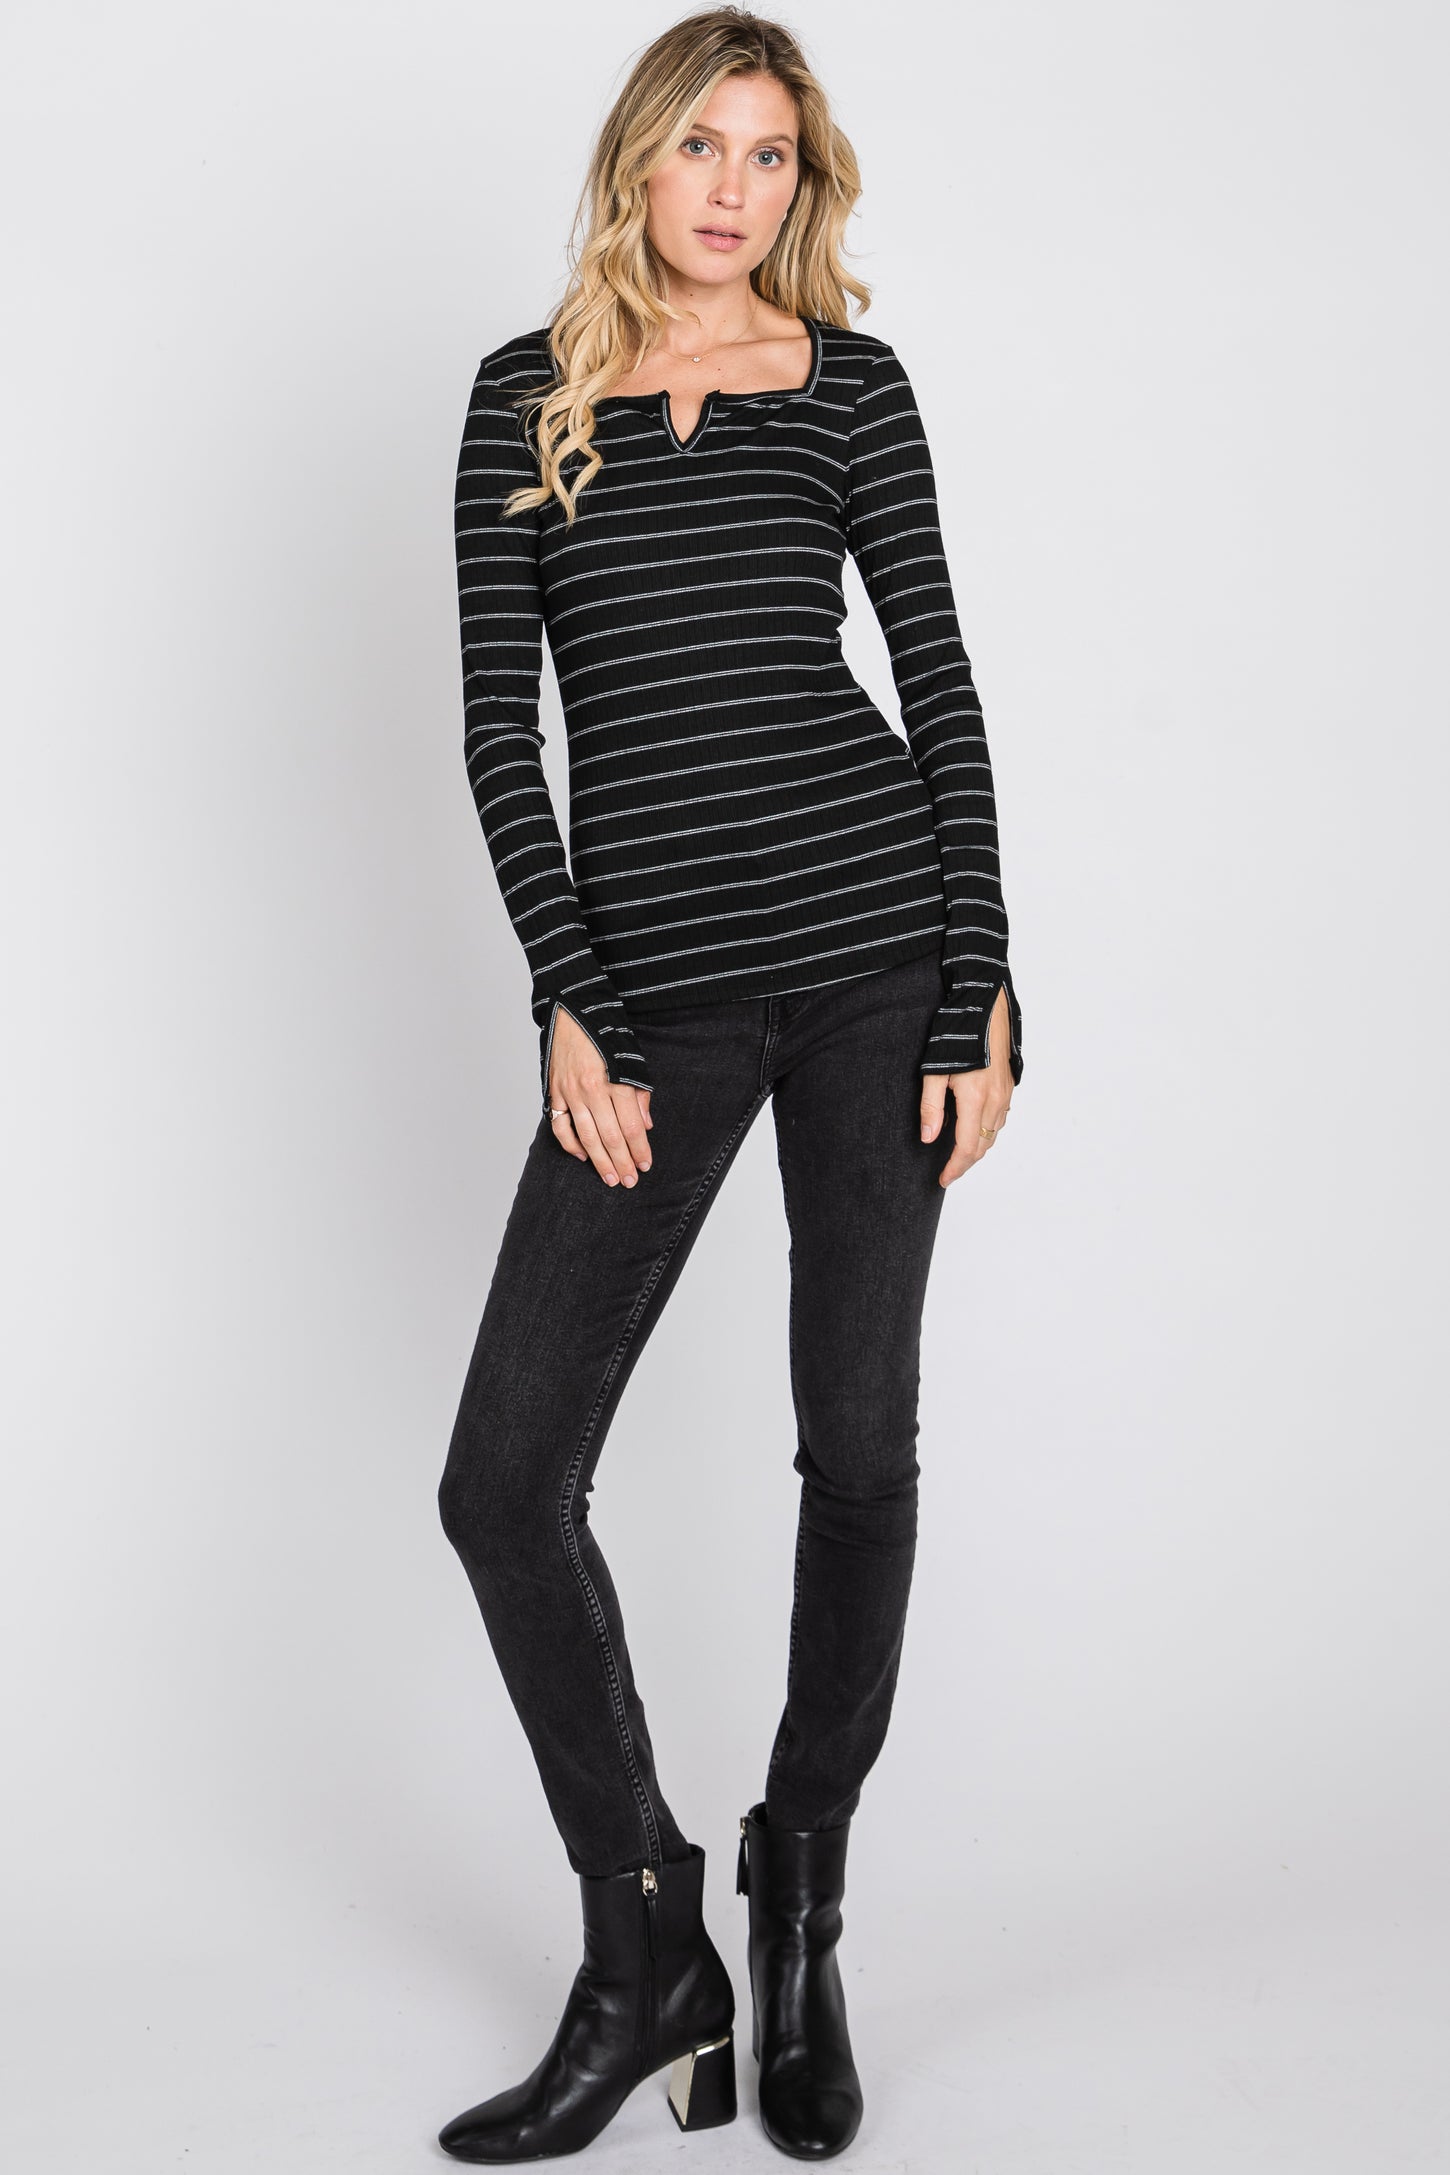 Black Ribbed Striped Long Sleeve Top